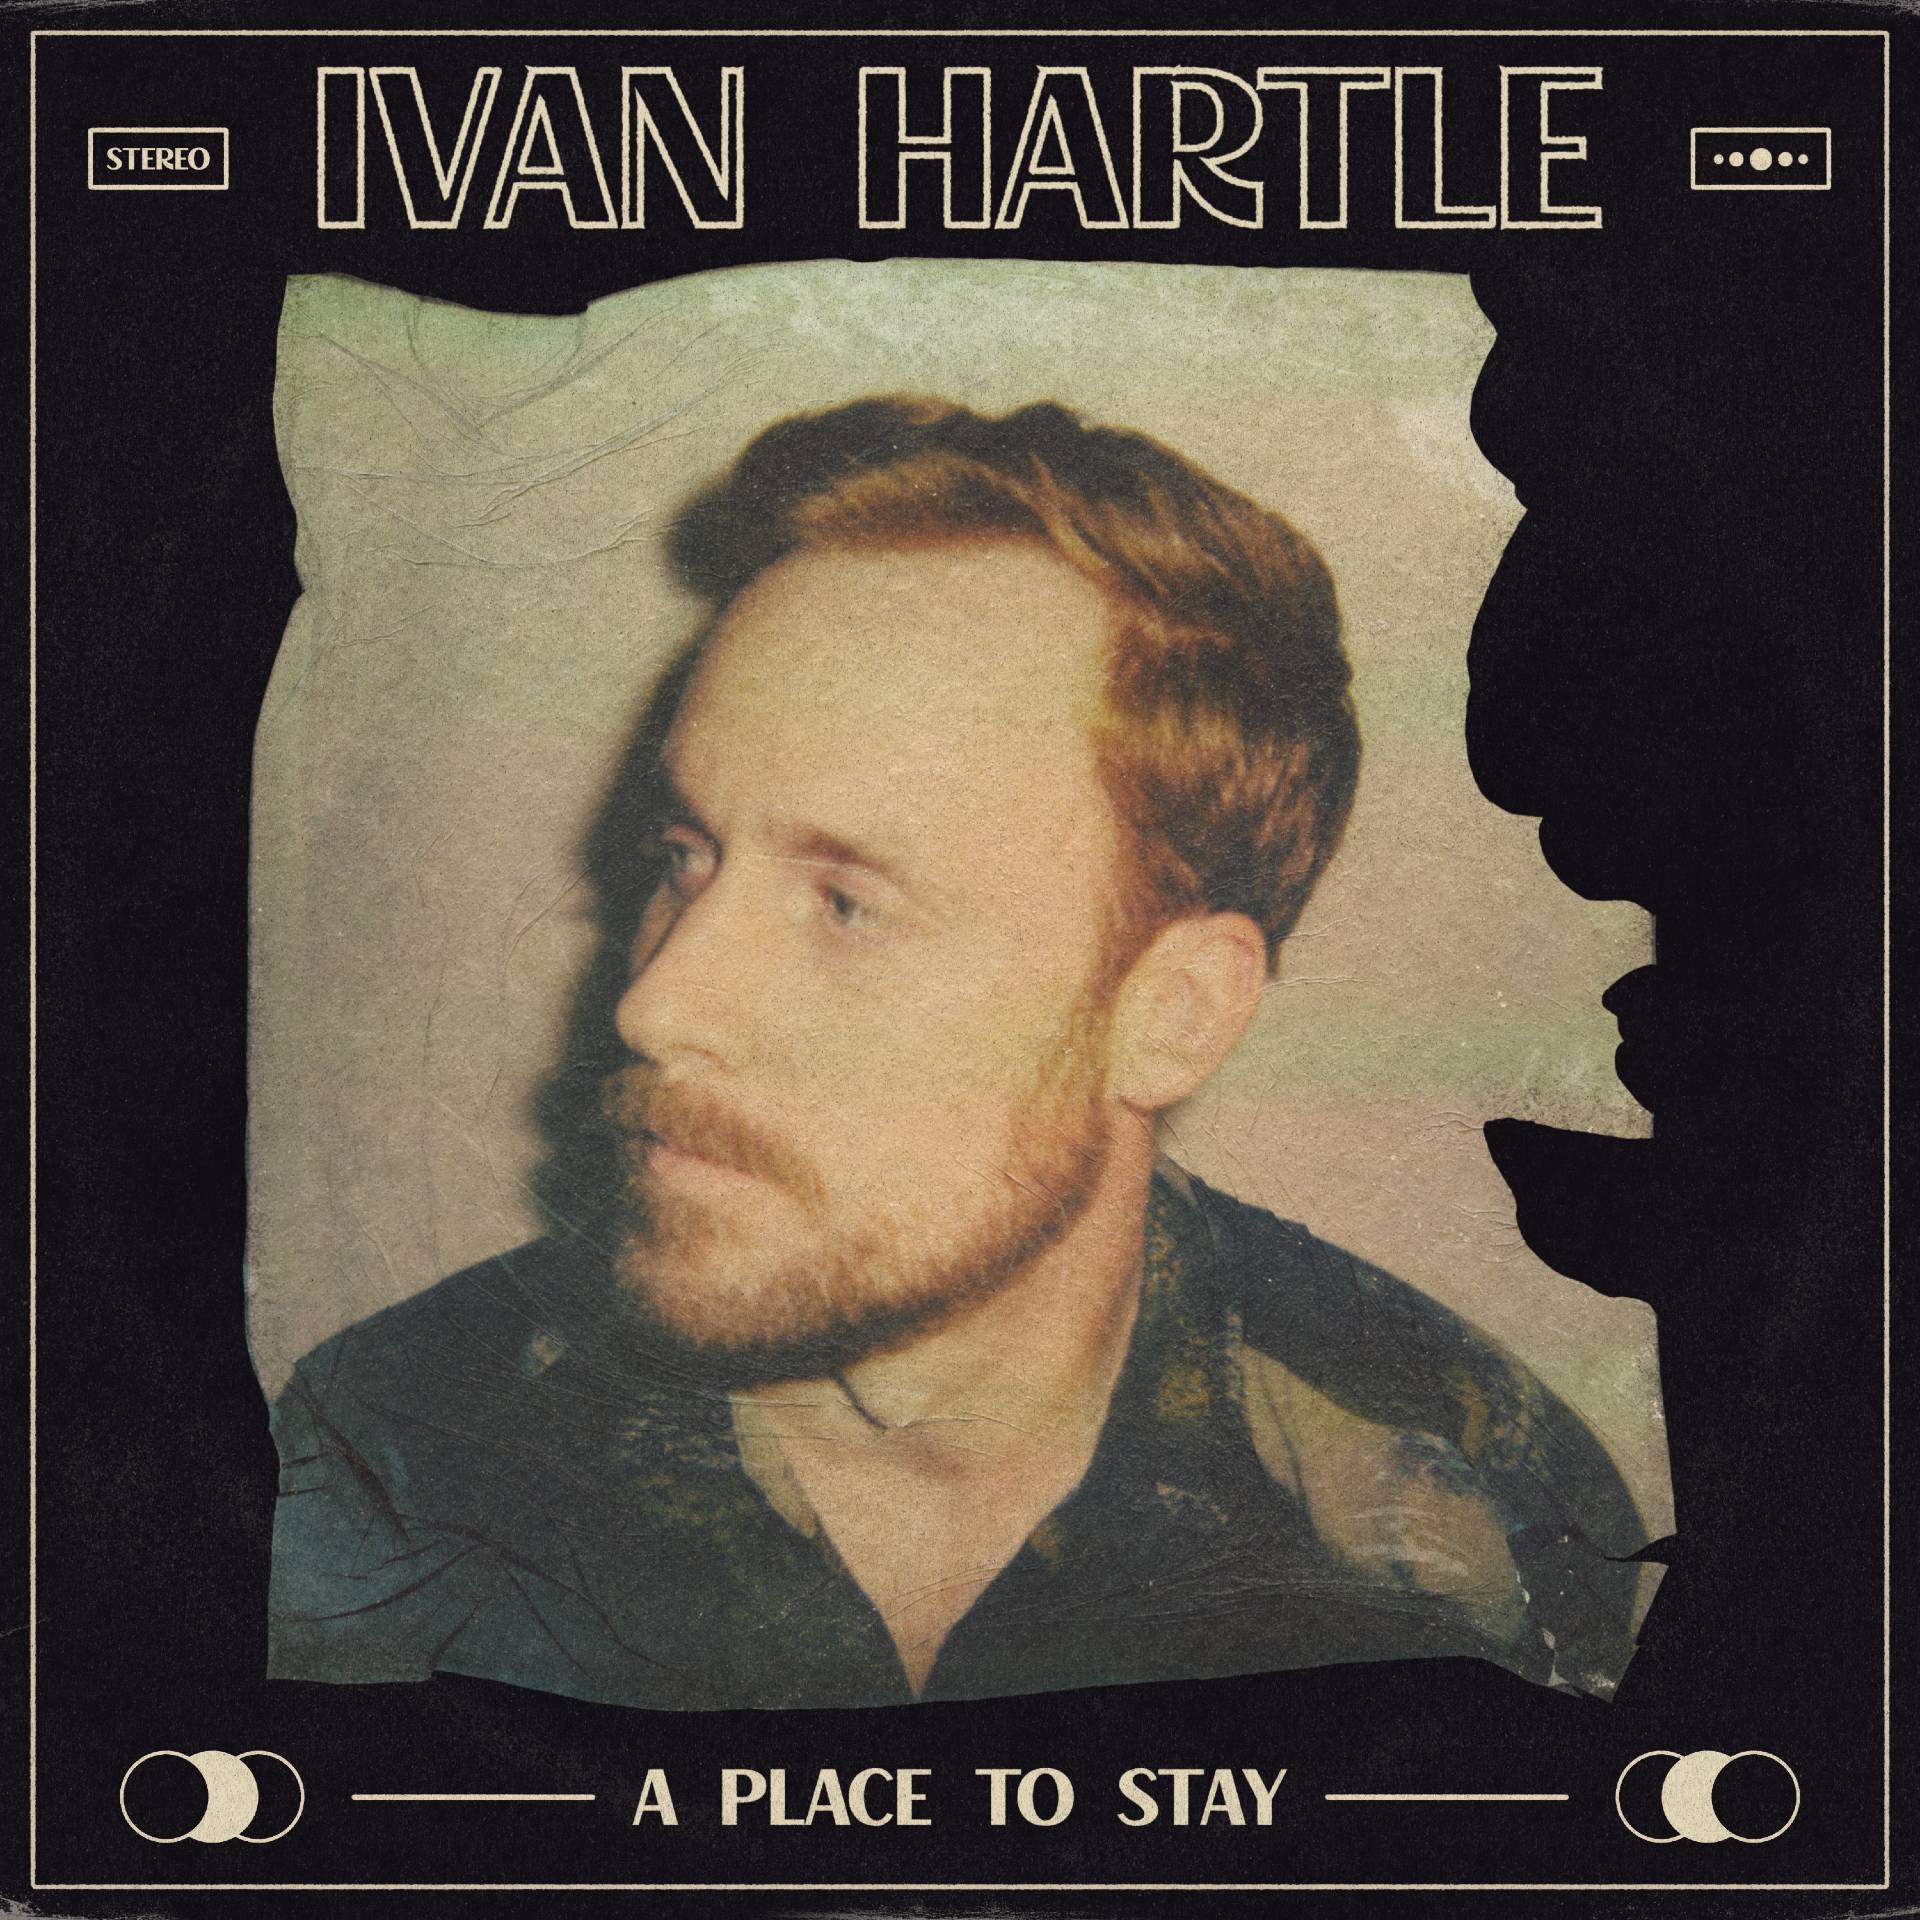 Ivan Hartle ‘A Place to Stay’ album artwork